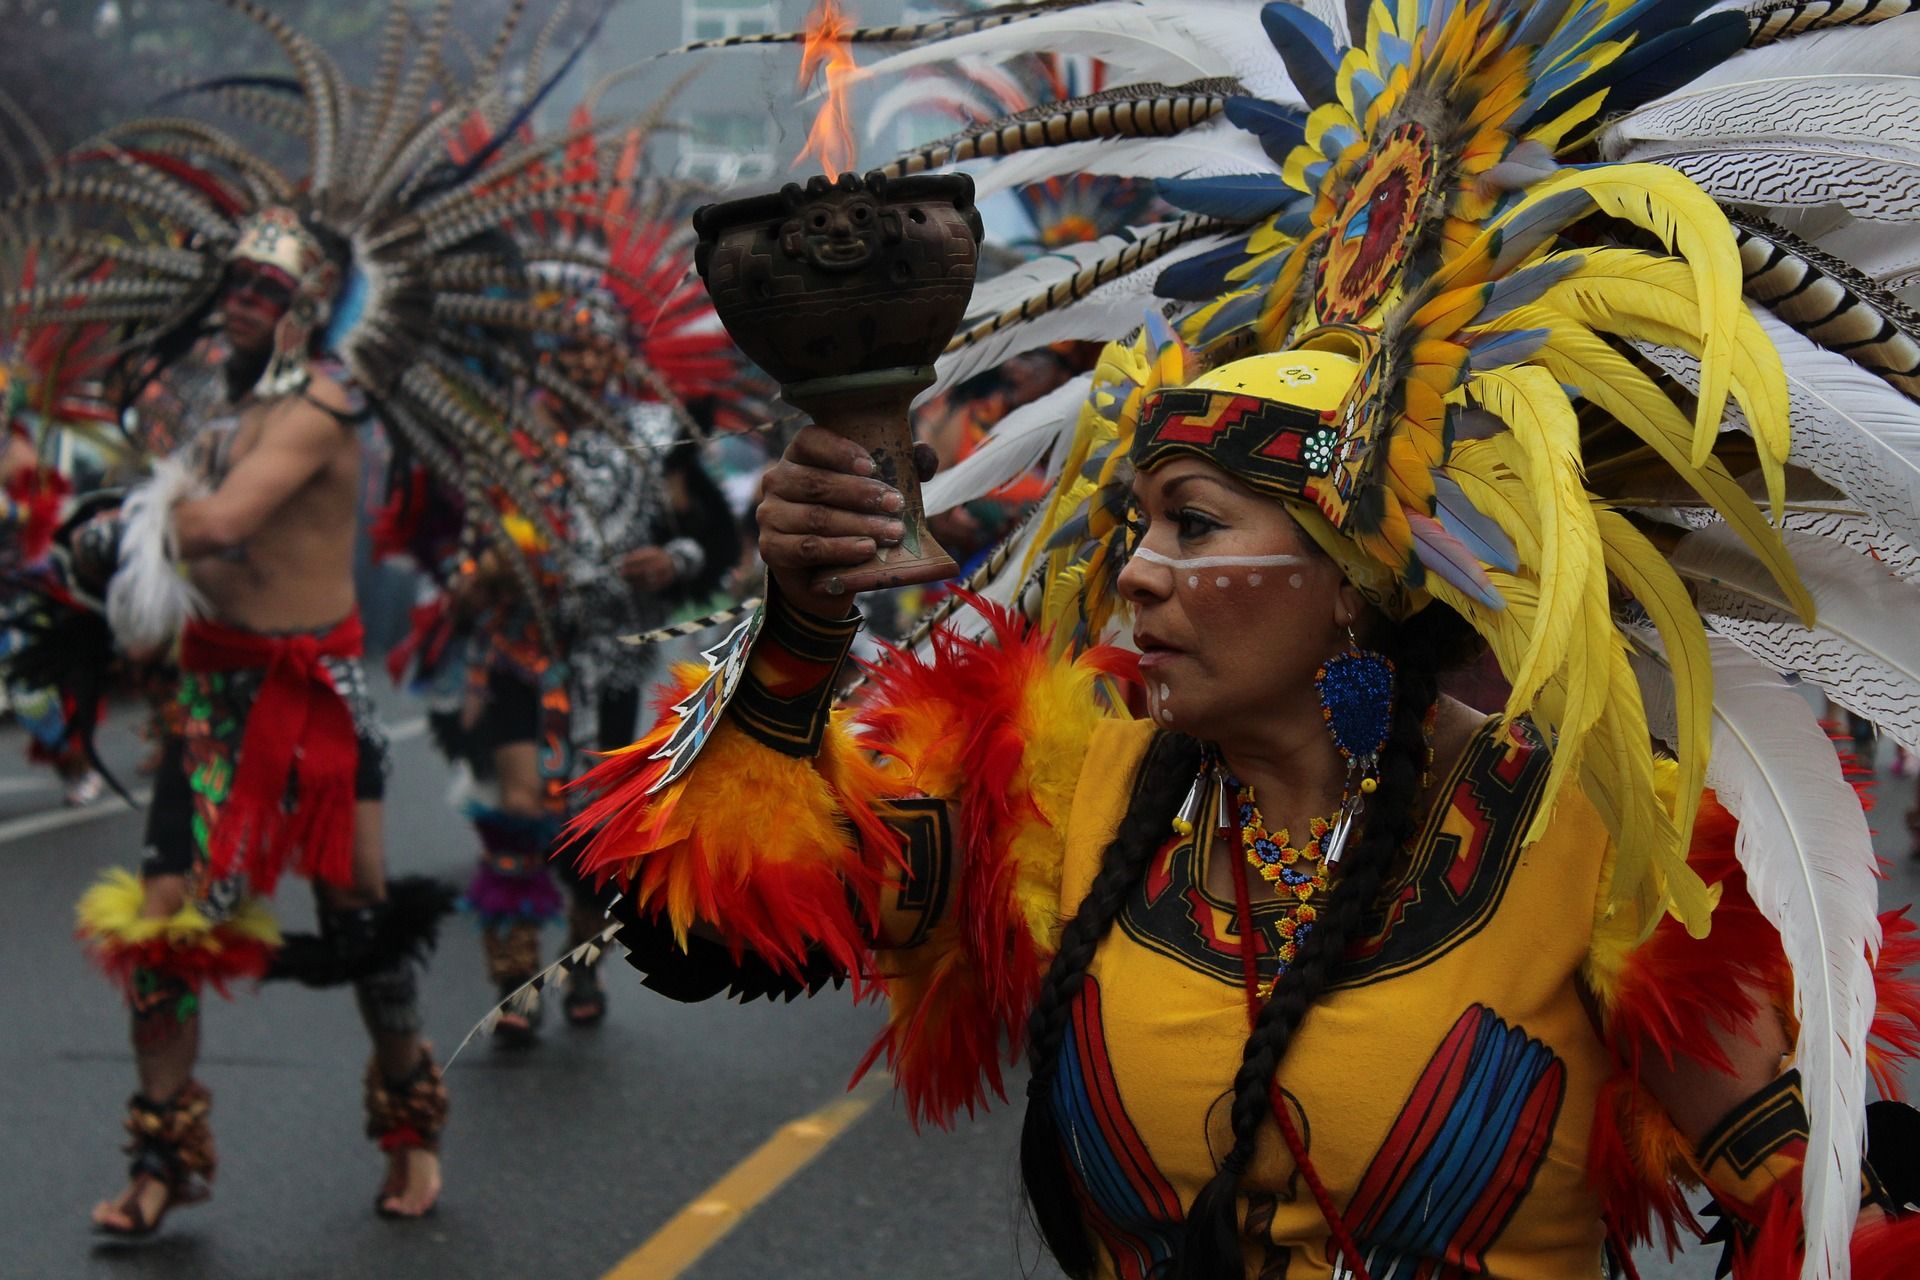 Is Indigenous Peoples’ Day a federal holiday in the US?